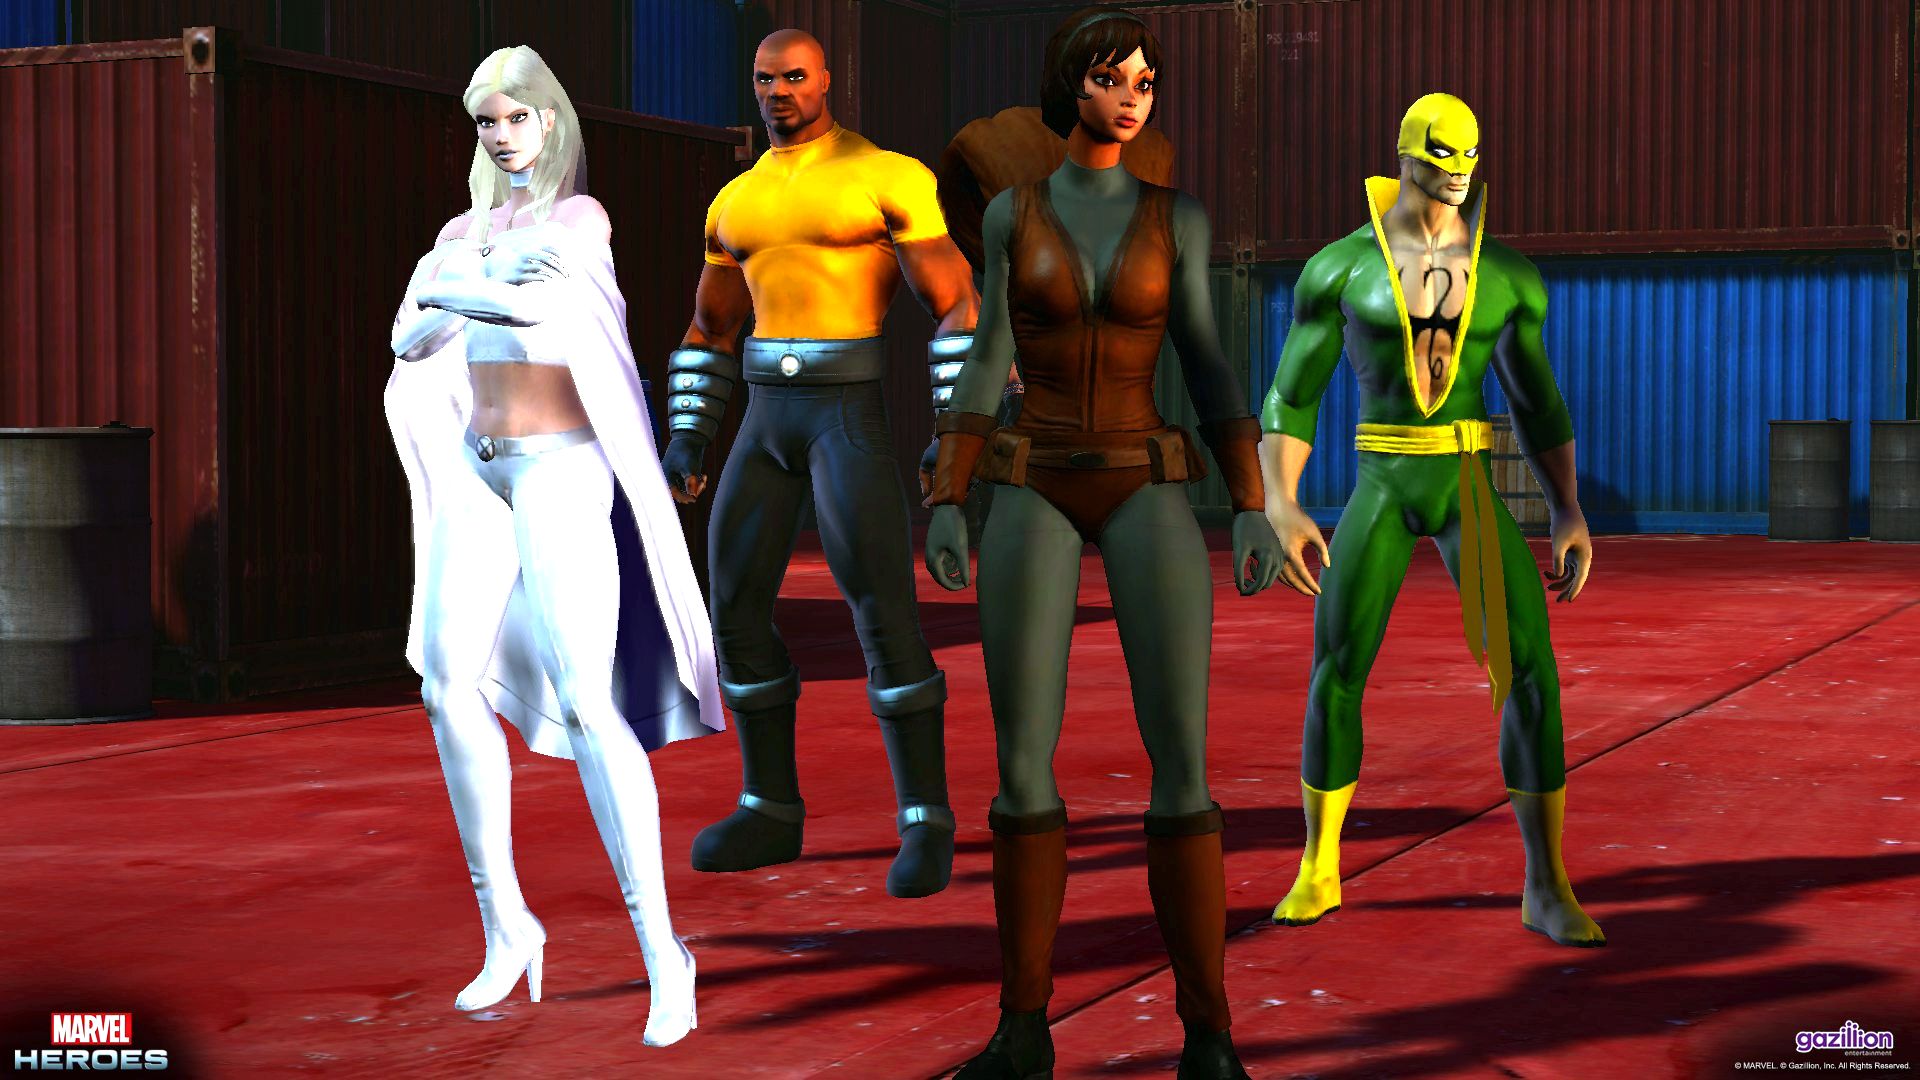 Marvel heroes will get forge of asgard update, mac beta soon position to freely